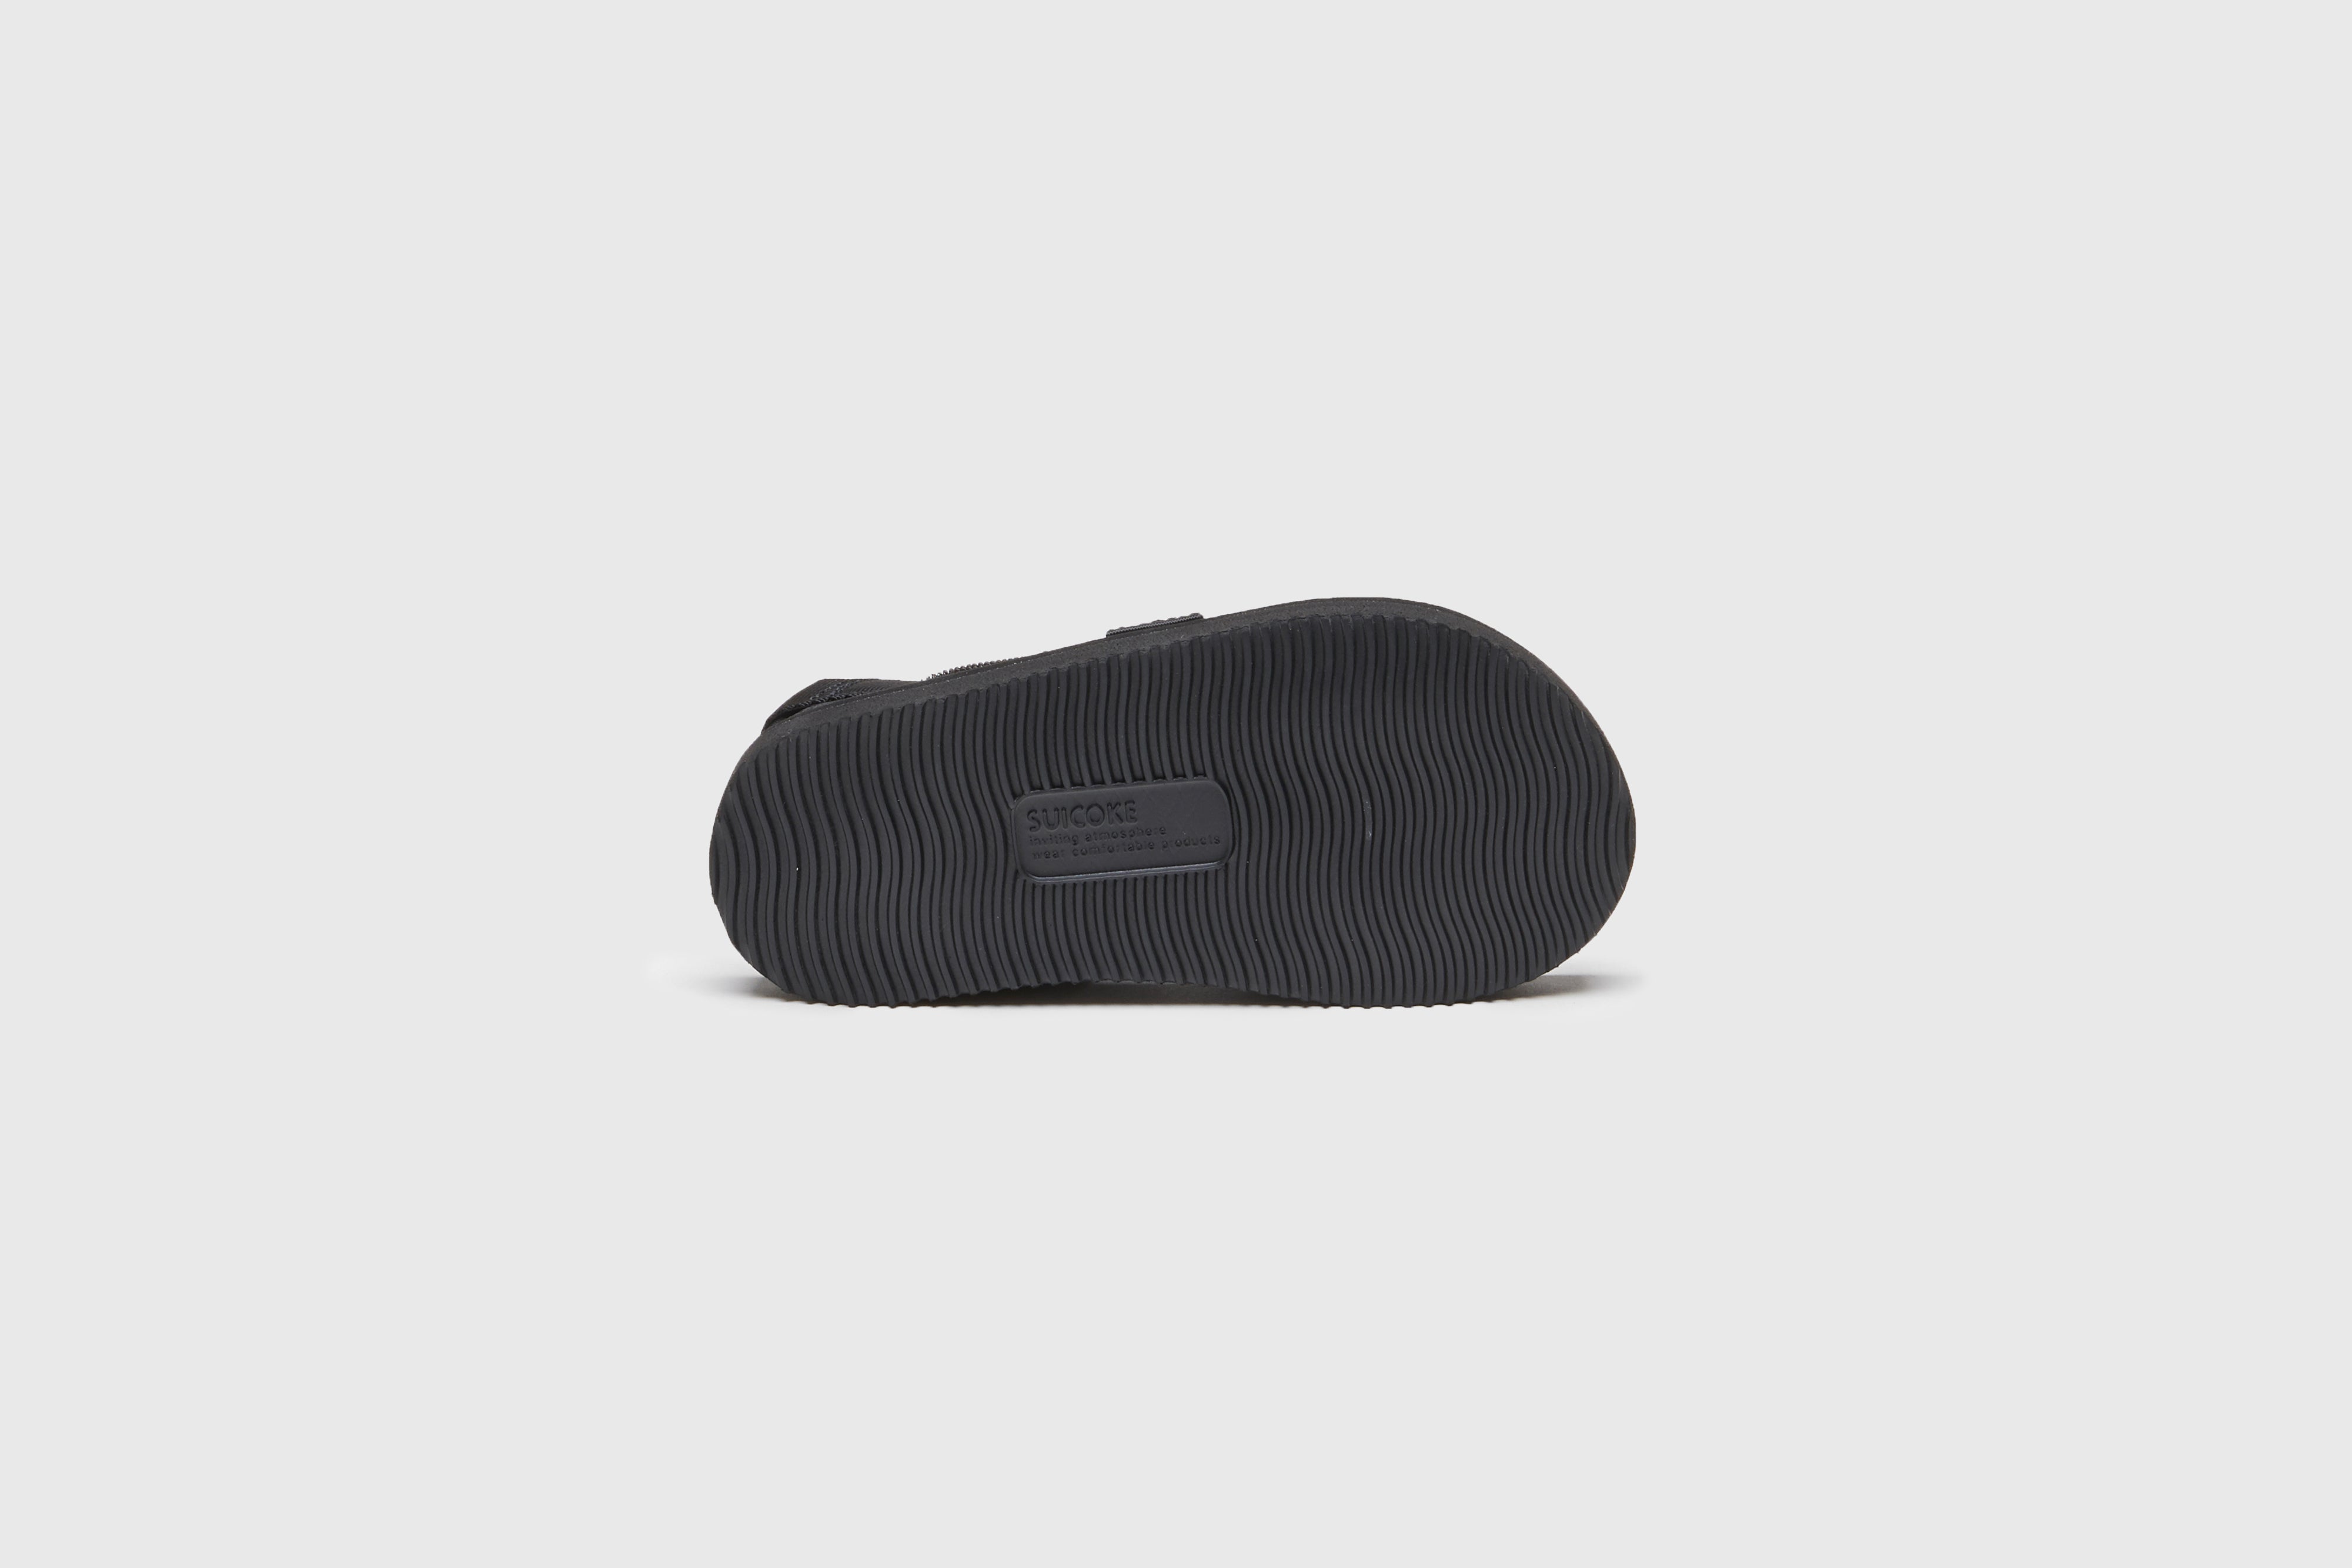 SUICOKE MOTO-2kids-PT05 slides with navy &amp; gray nylon upper, navy &amp; gray midsole and sole, strap and logo patch. From Spring/Summer 2023 collection on eightywingold Web Store, an official partner of SUICOKE. OG-056-2KIDS-PT05 NAVY X GRAY